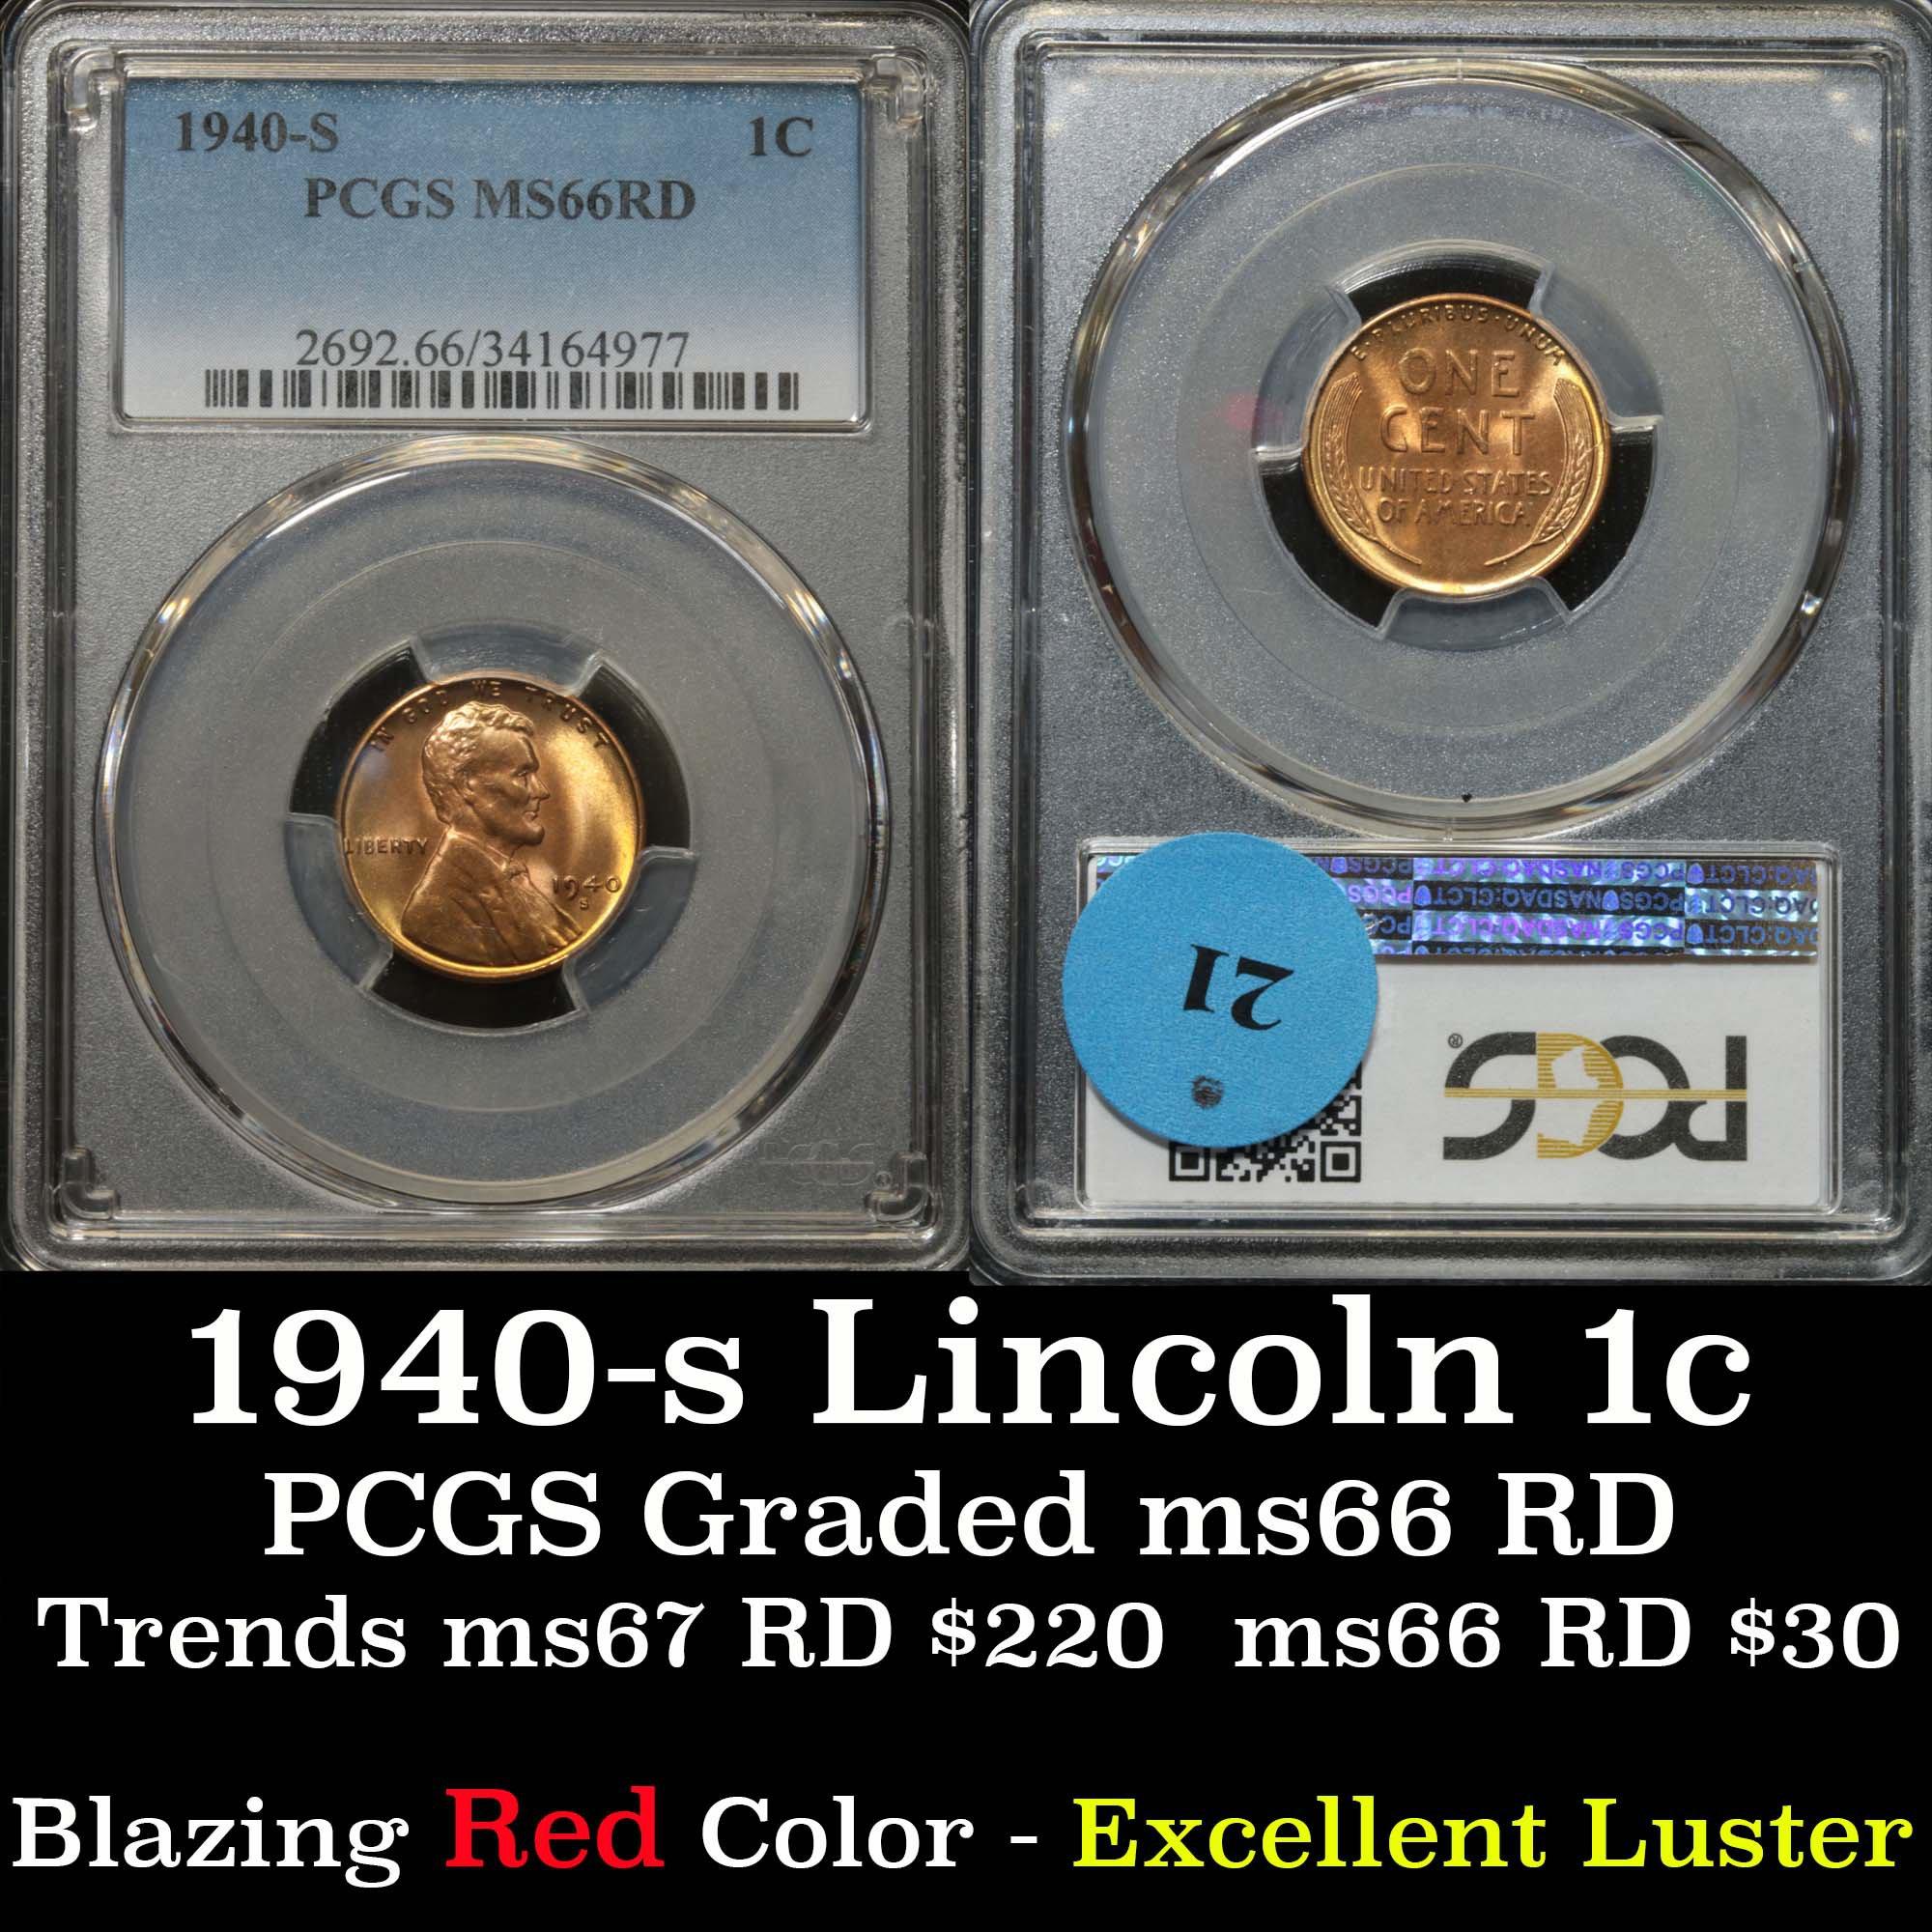 PCGS 1940-s Lincoln Cent 1c Graded ms66 rd by PCGS